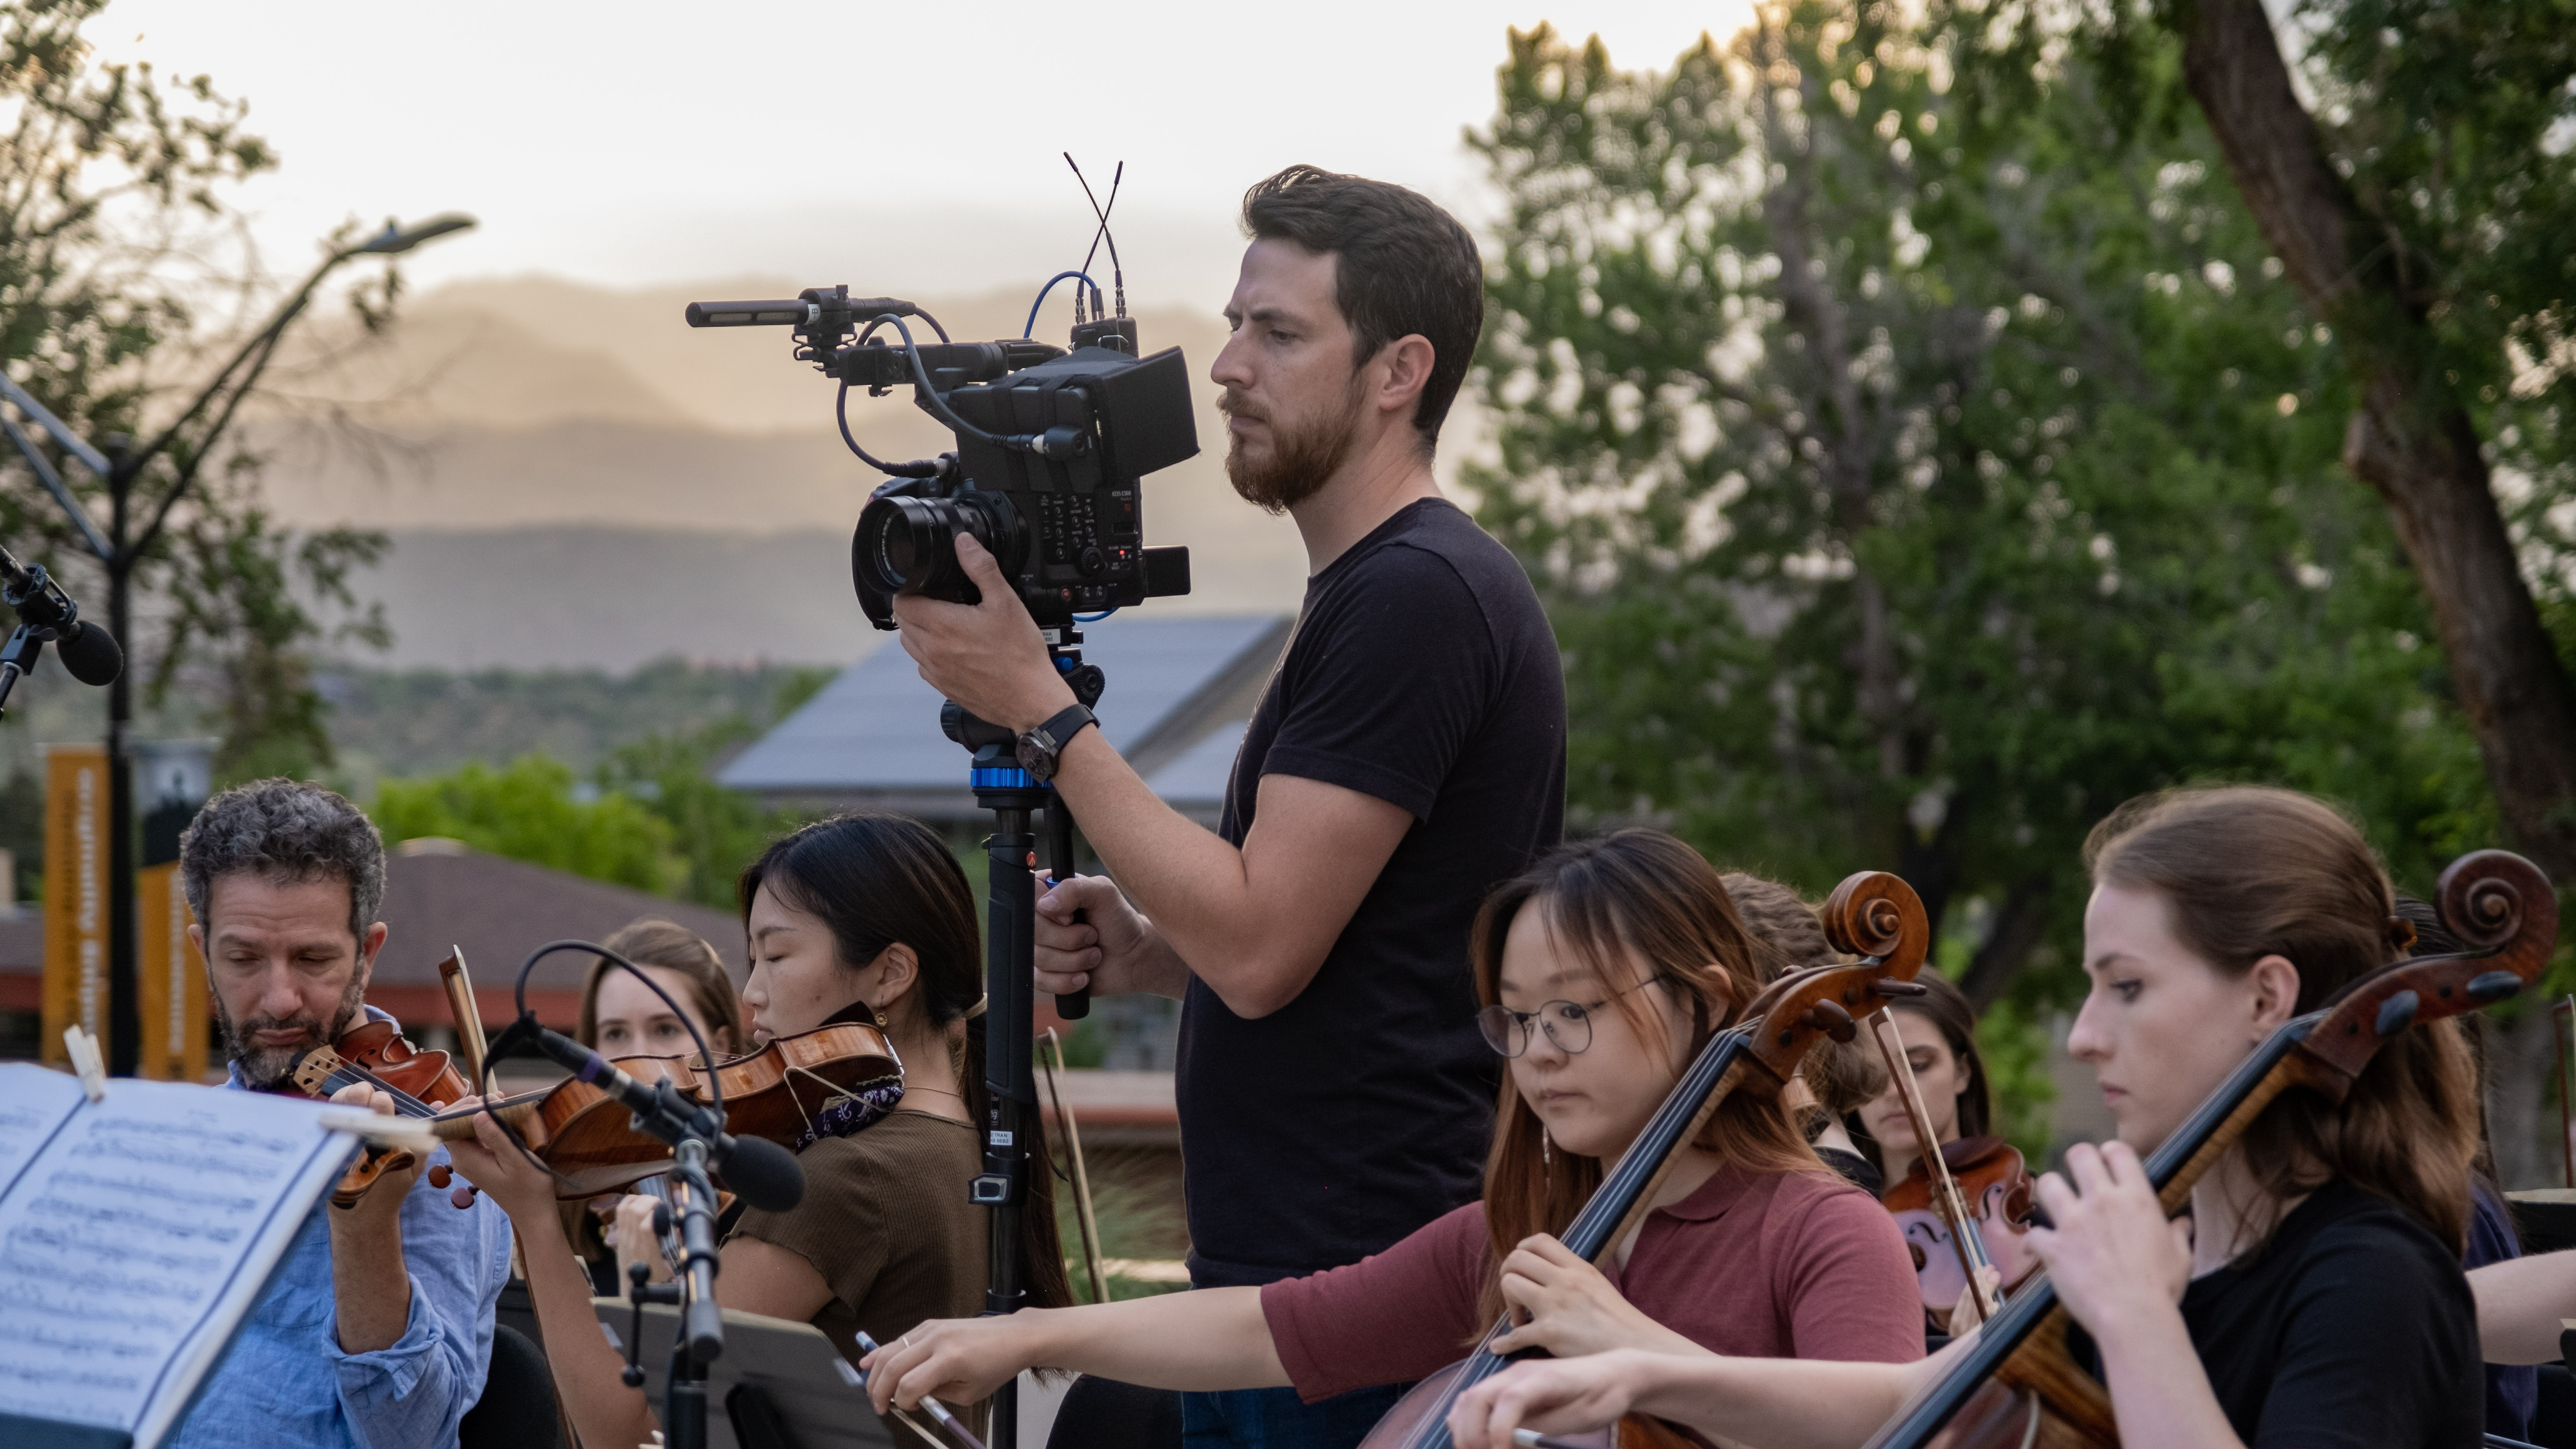 Filming Festival Faculty and Fellows playing Copland <span class="cc-gallery-credit">[Josh Birndorf]</span>